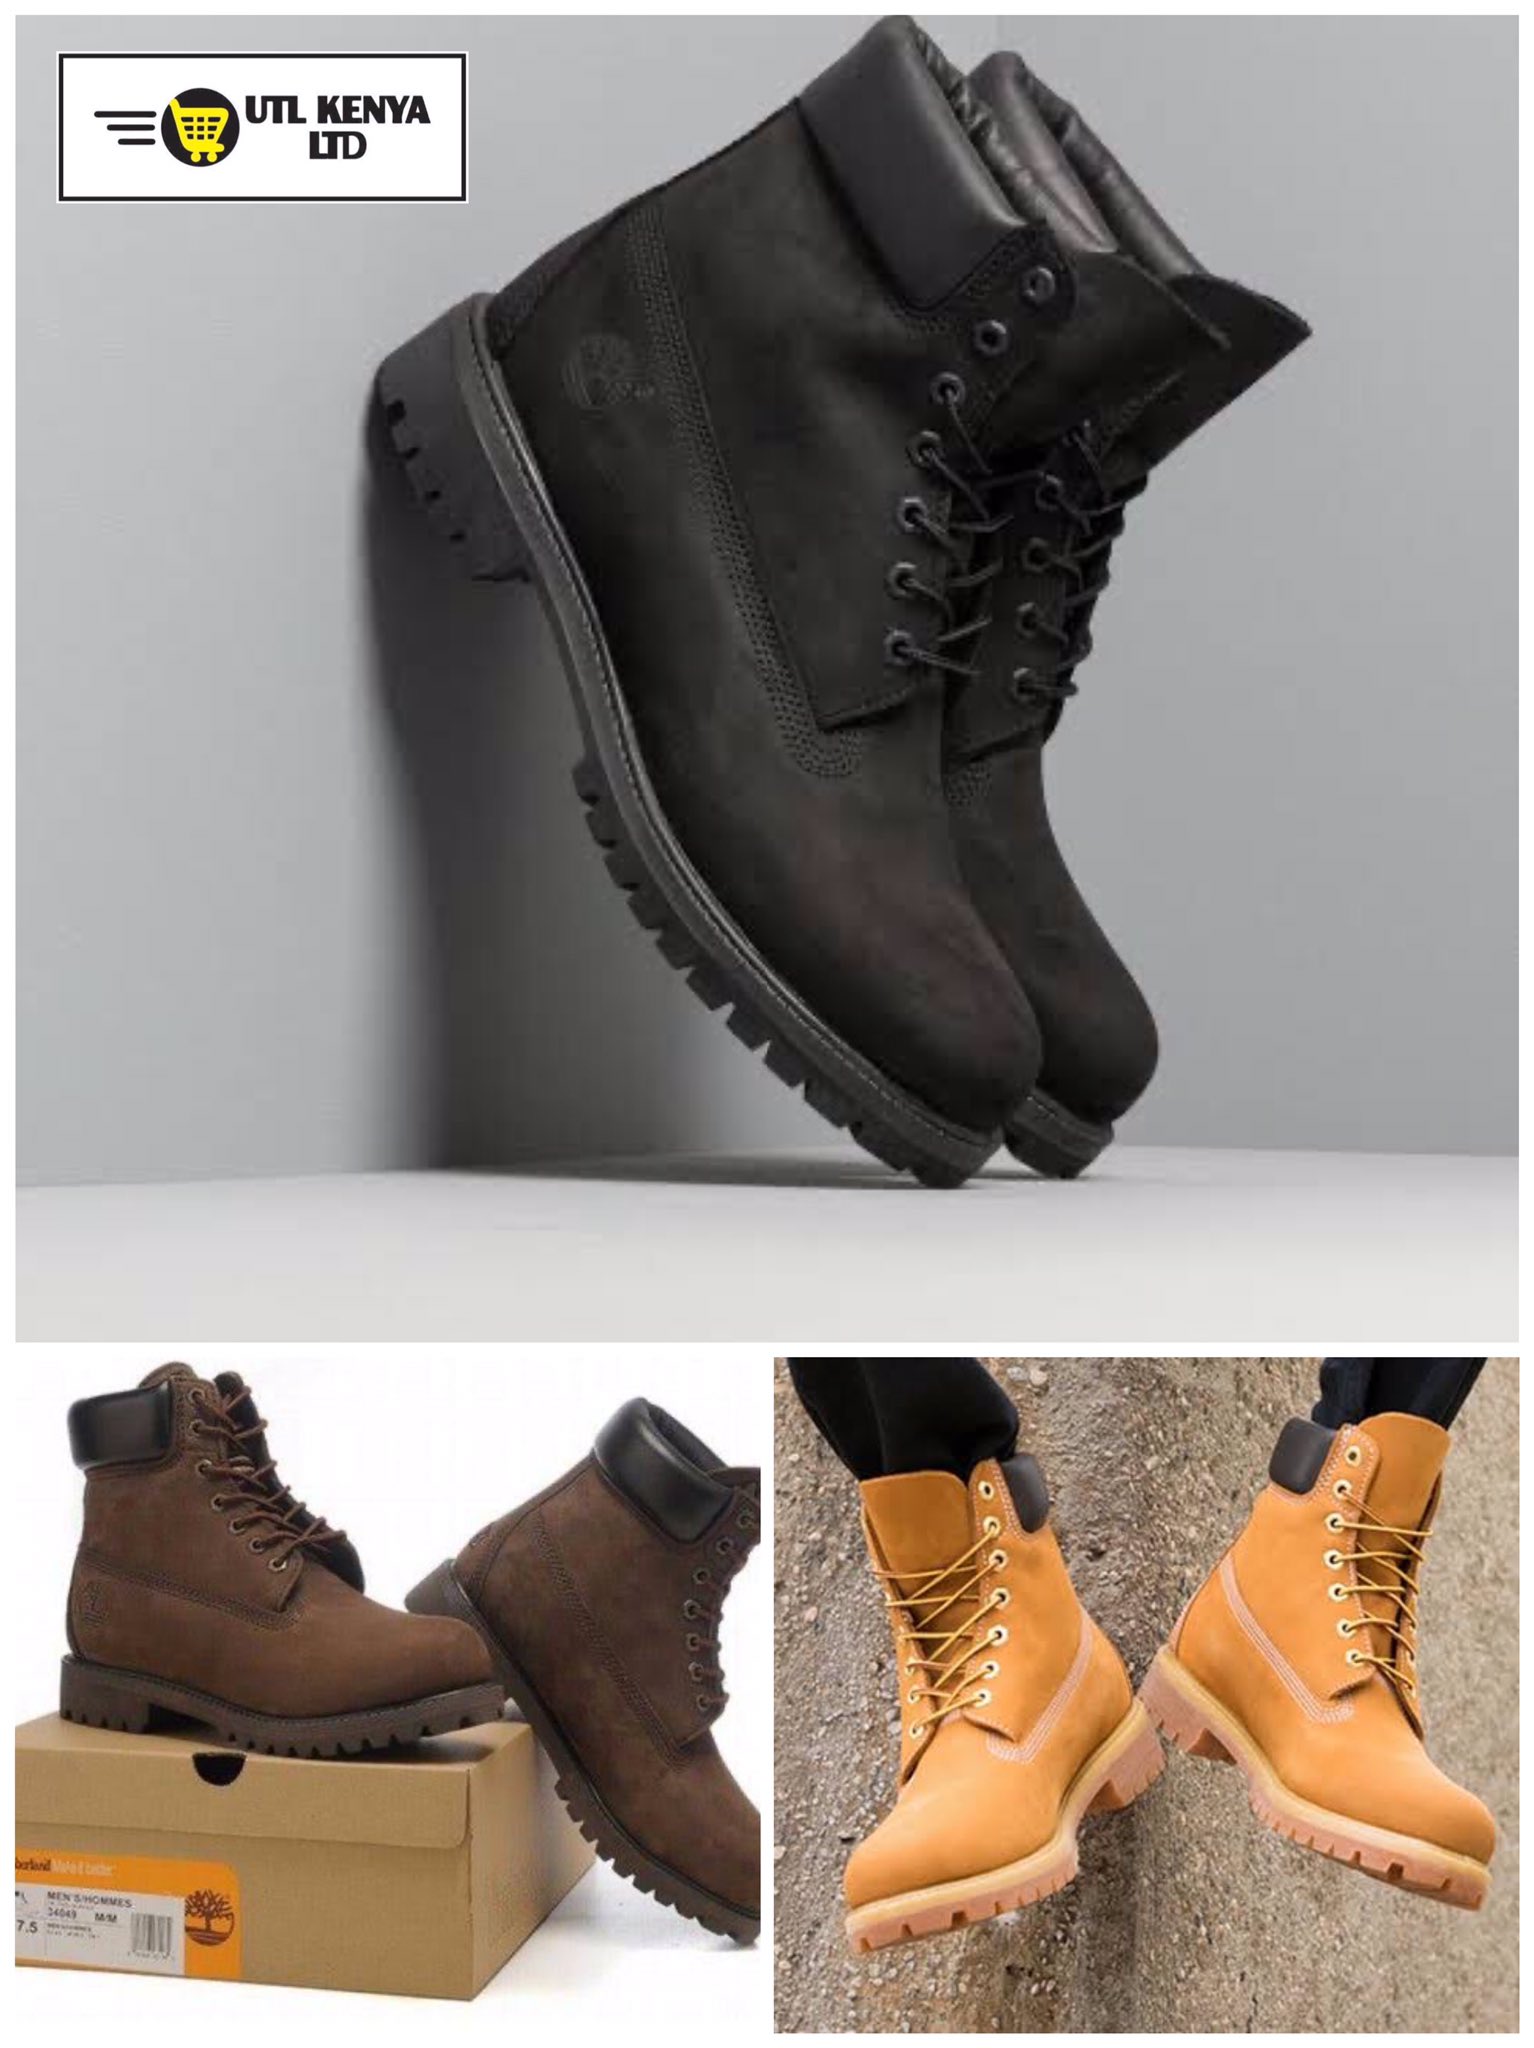 Utl Kenya on Twitter: "Product:Timberland Boots Wholesale Price:Ksh.Ksh.3,600 Retail Price:Ksh.4,500 How Order:Call/WhatsApp 0788807425/0729039995 Payment Is Cash On Delivery depending on location We deliver countrywide #Burma ...